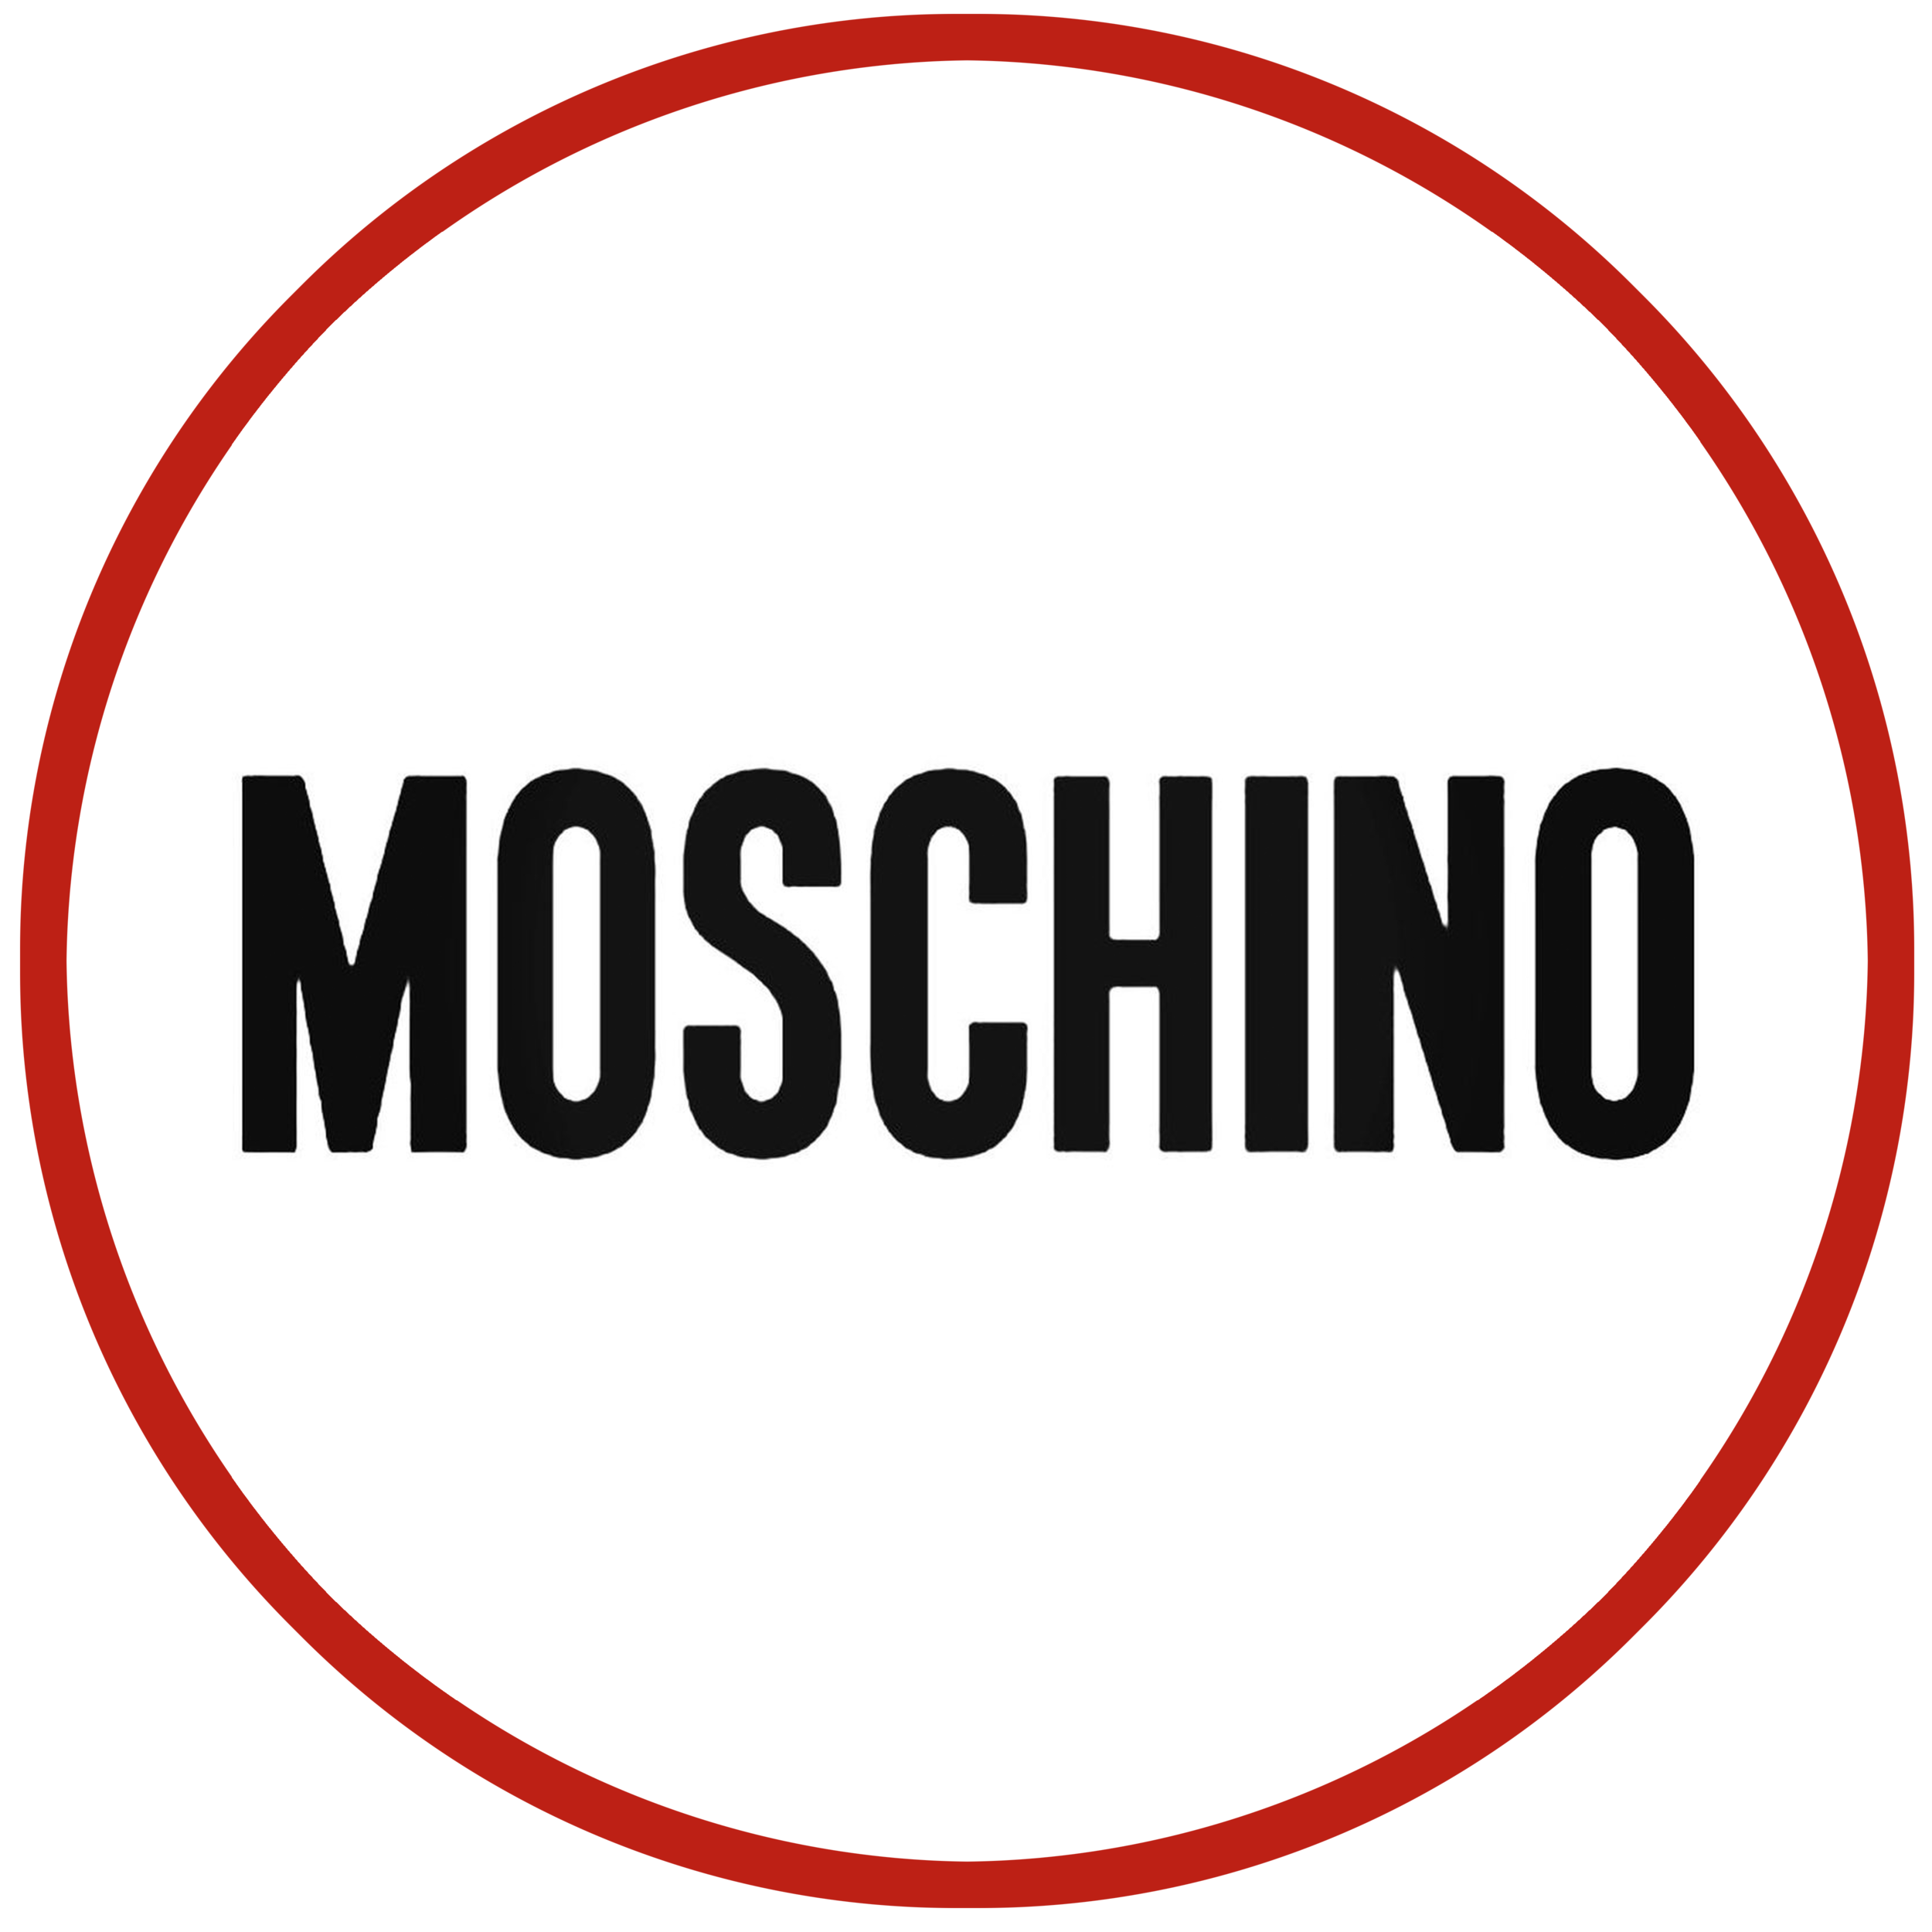 moschino.png